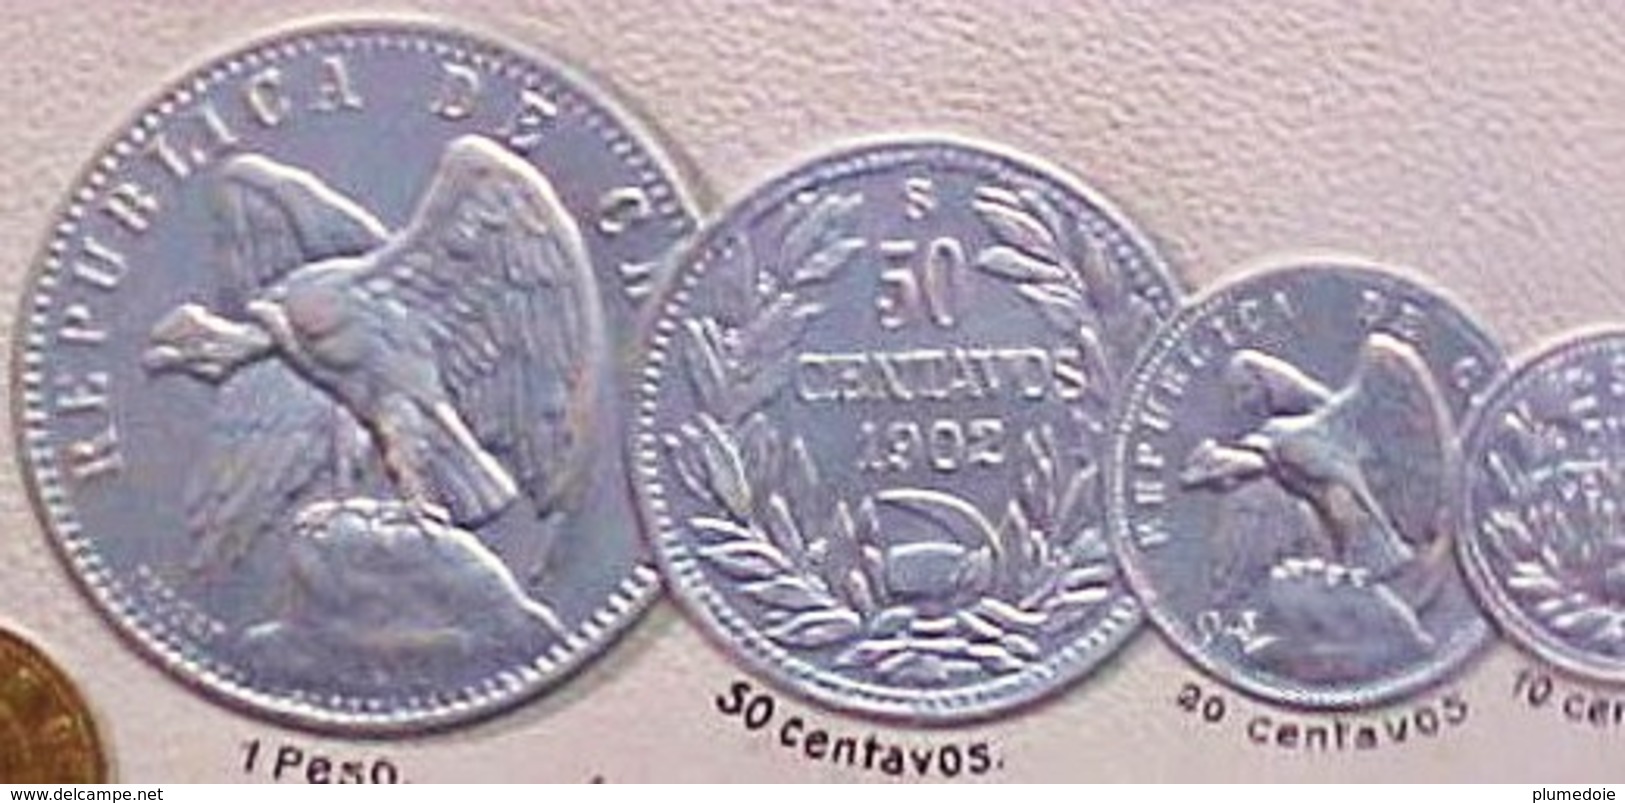 Cpa Gaufree MONNAIES Pièces Du CHILI 1902 PESO CENTAVOS OR ARGENT CUIVRE, Embossed COIN PESOS Gold Silver Early Pc - Monnaies (représentations)